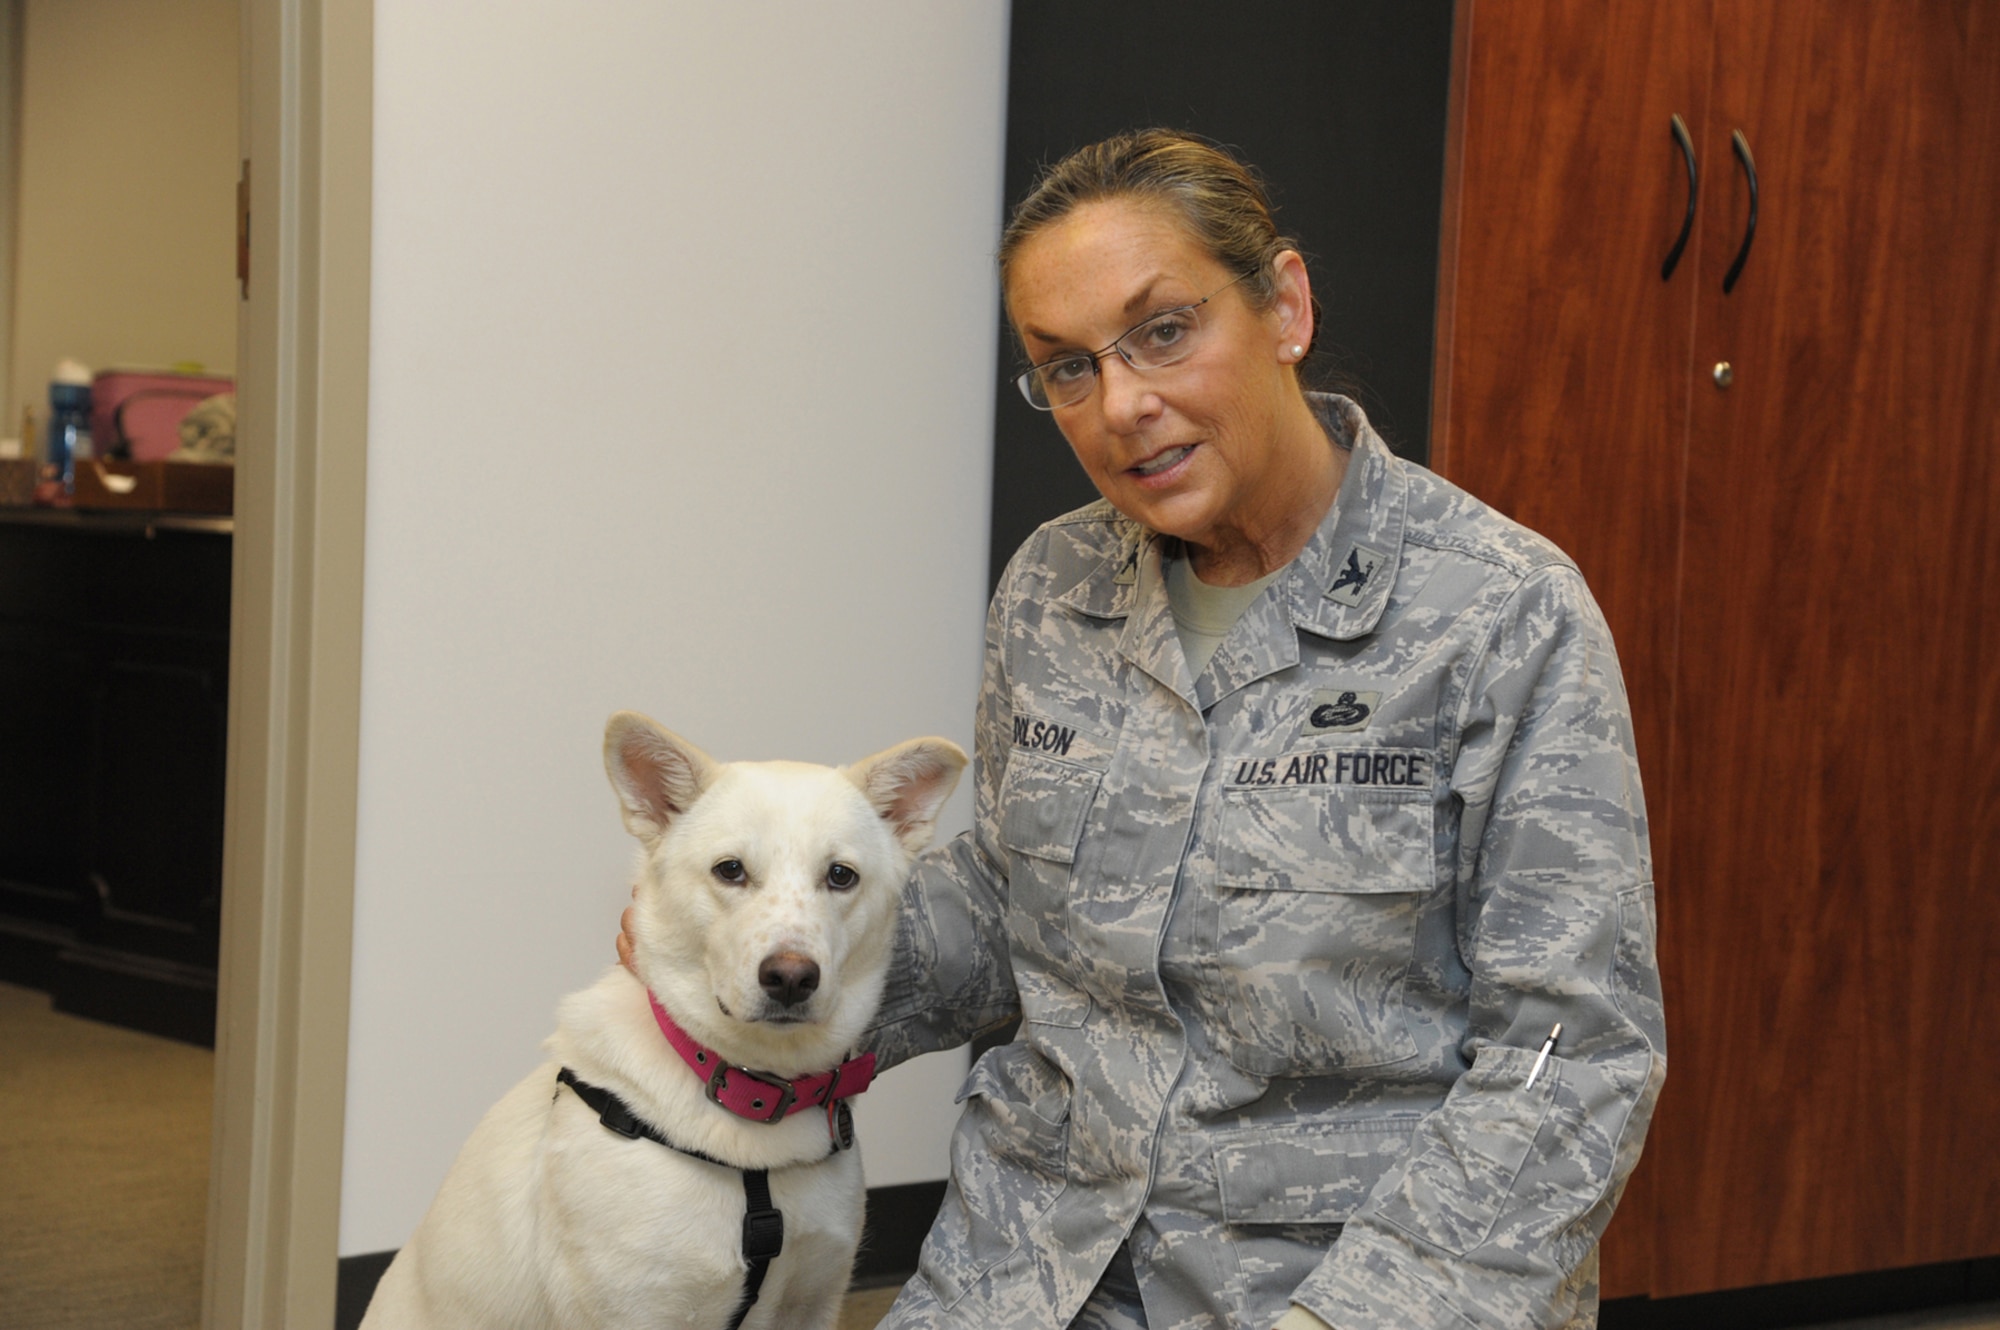 Air Force Col. Ramona Dolson, Air Force Personnel Center chief selection board secretariat, and her dog Bebe pose for a photo Feb. 7 at Joint Base San Antonio-Randolph.  (U.S. Air Force photo by Joel Martinez and photo illustration by Maggie Armstrong)